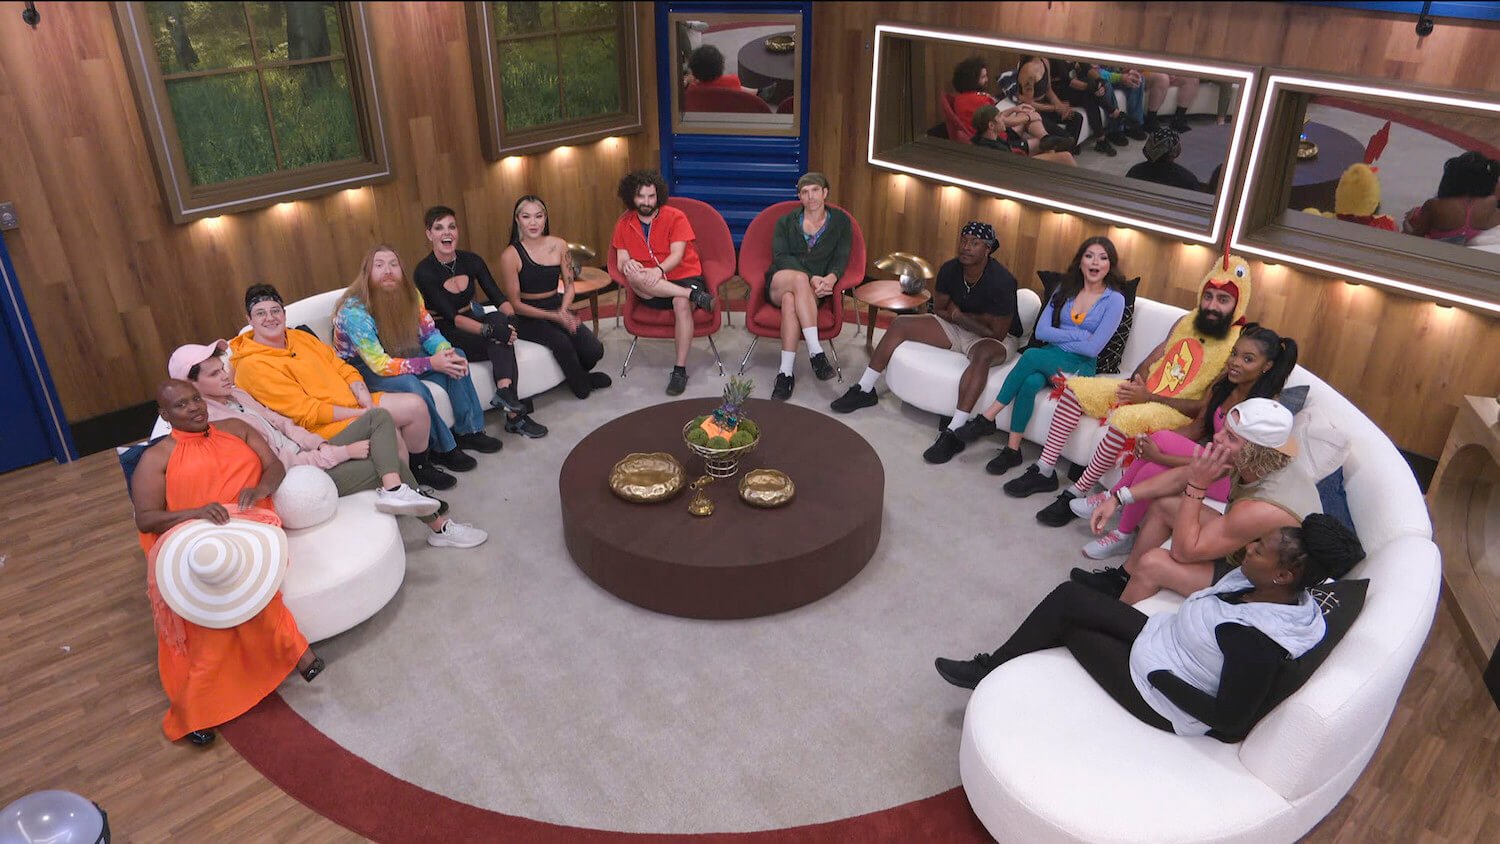 'Big Brother' Season 25 Week 4 contestants sitting in a semi-circle on a couch